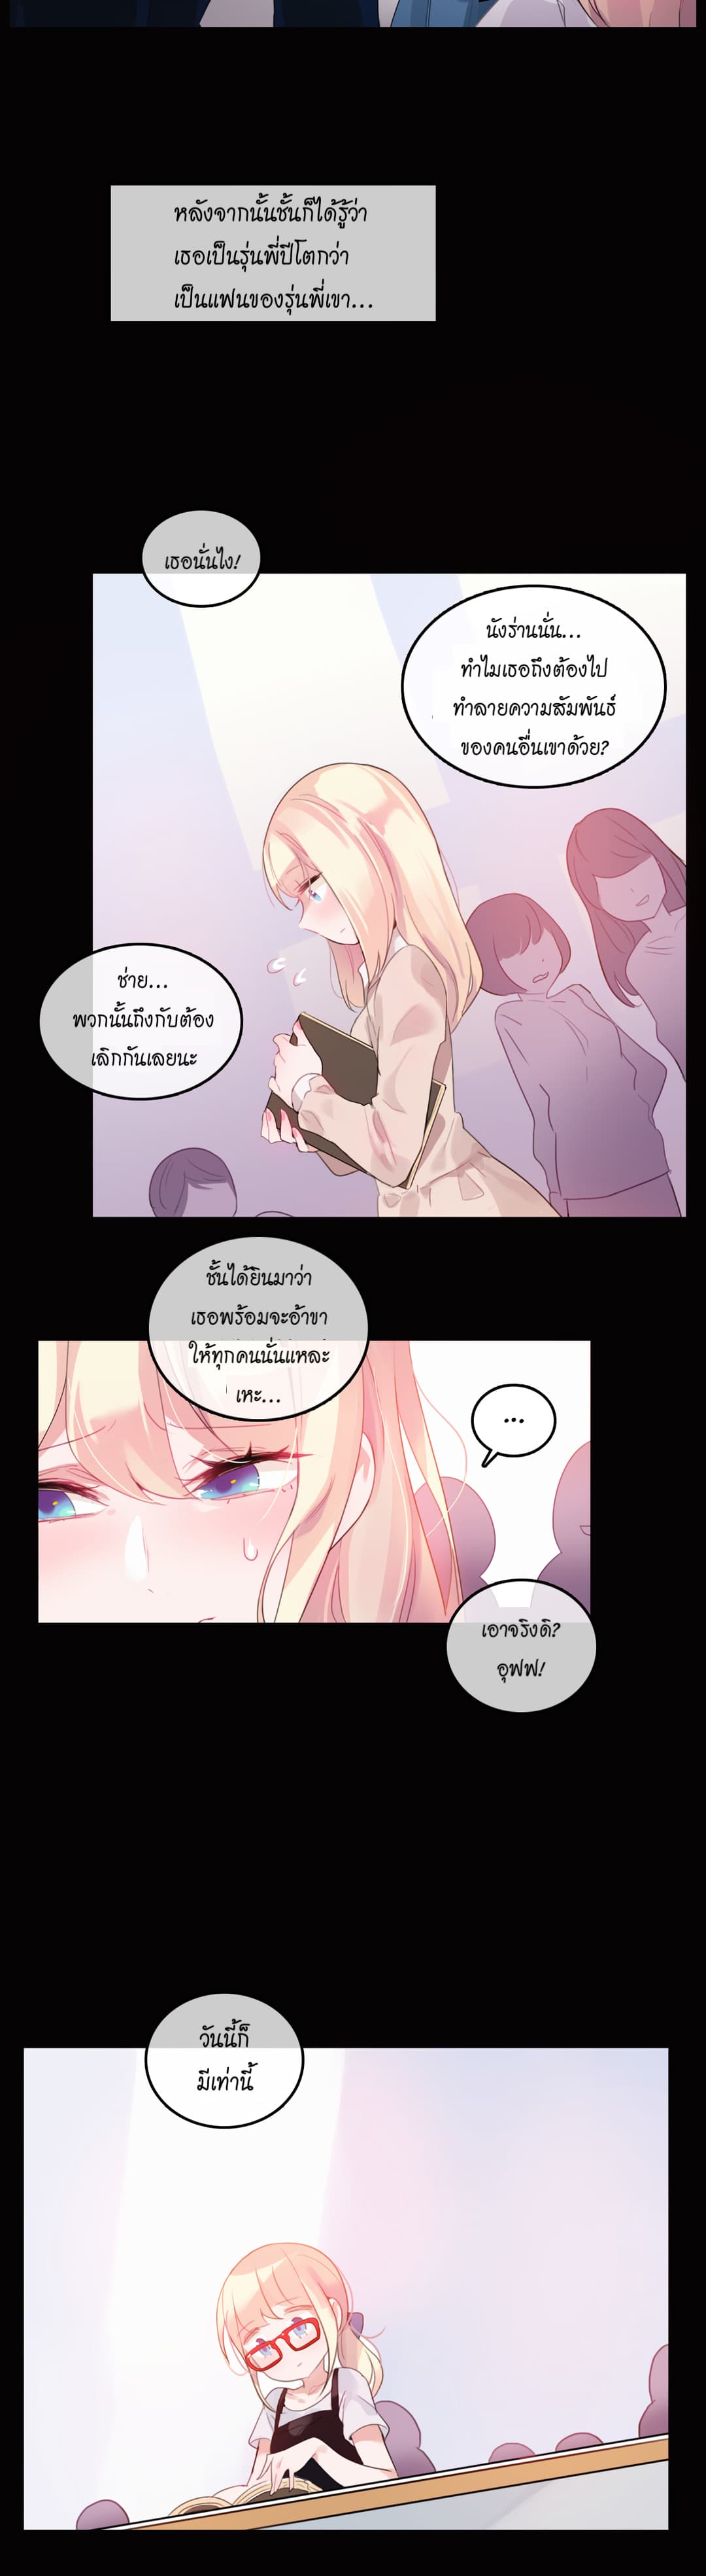 A Pervert’s Daily Life 20 (17)